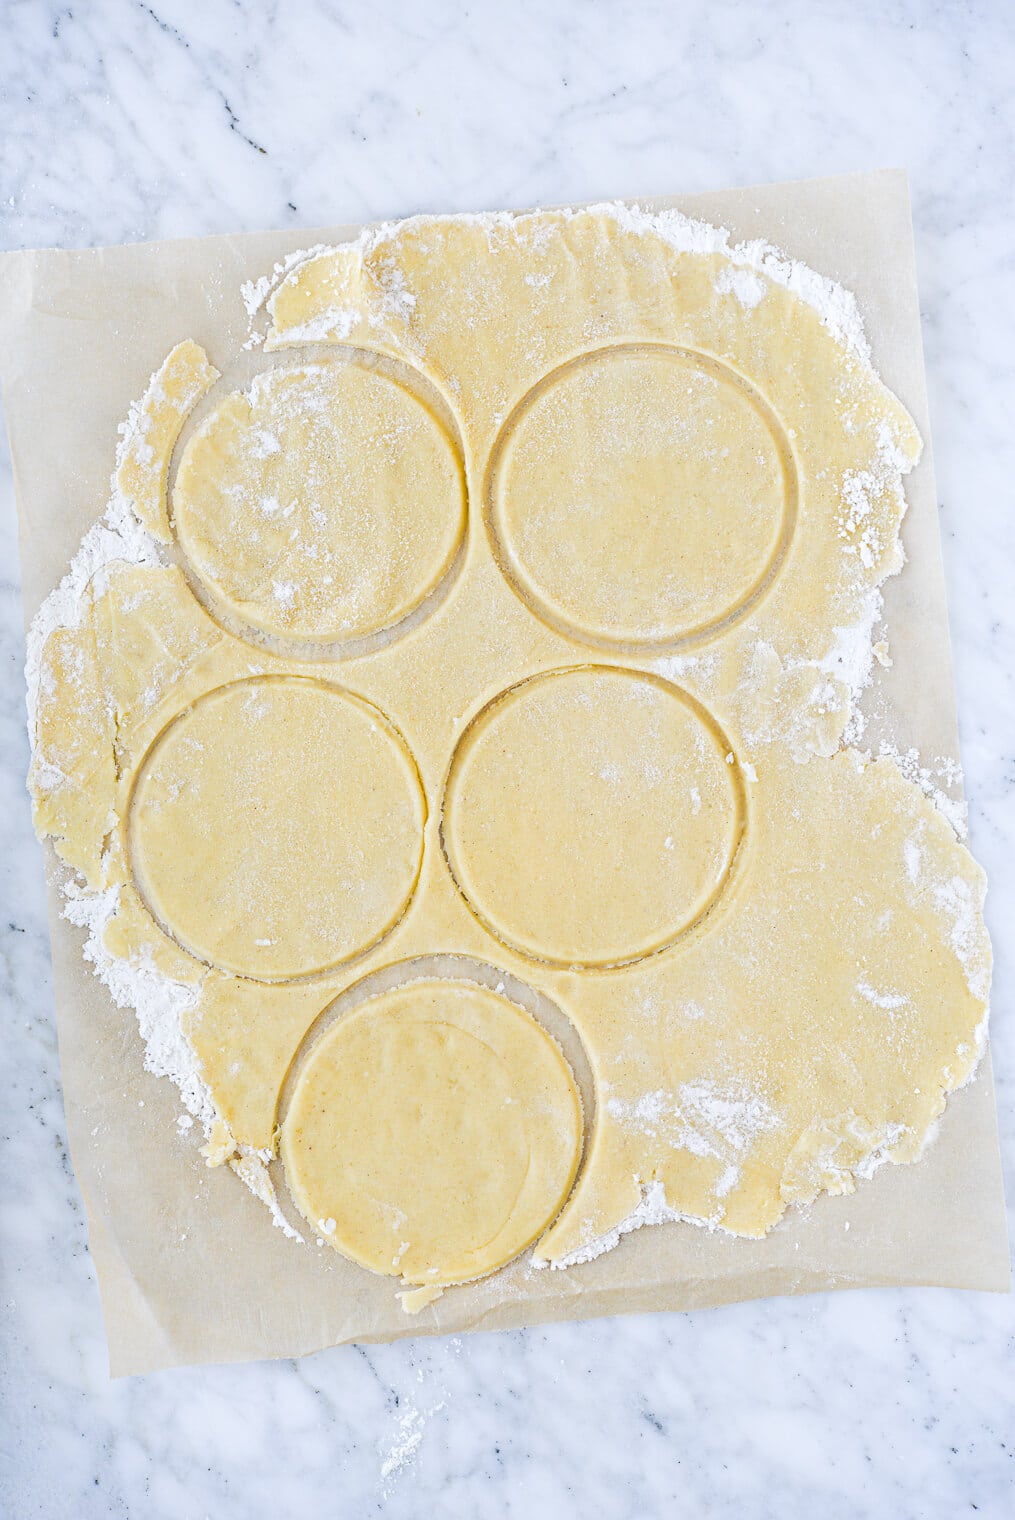 top view of a rolled out pie crust on a sheet of parchment paper with 5 circle cut outs